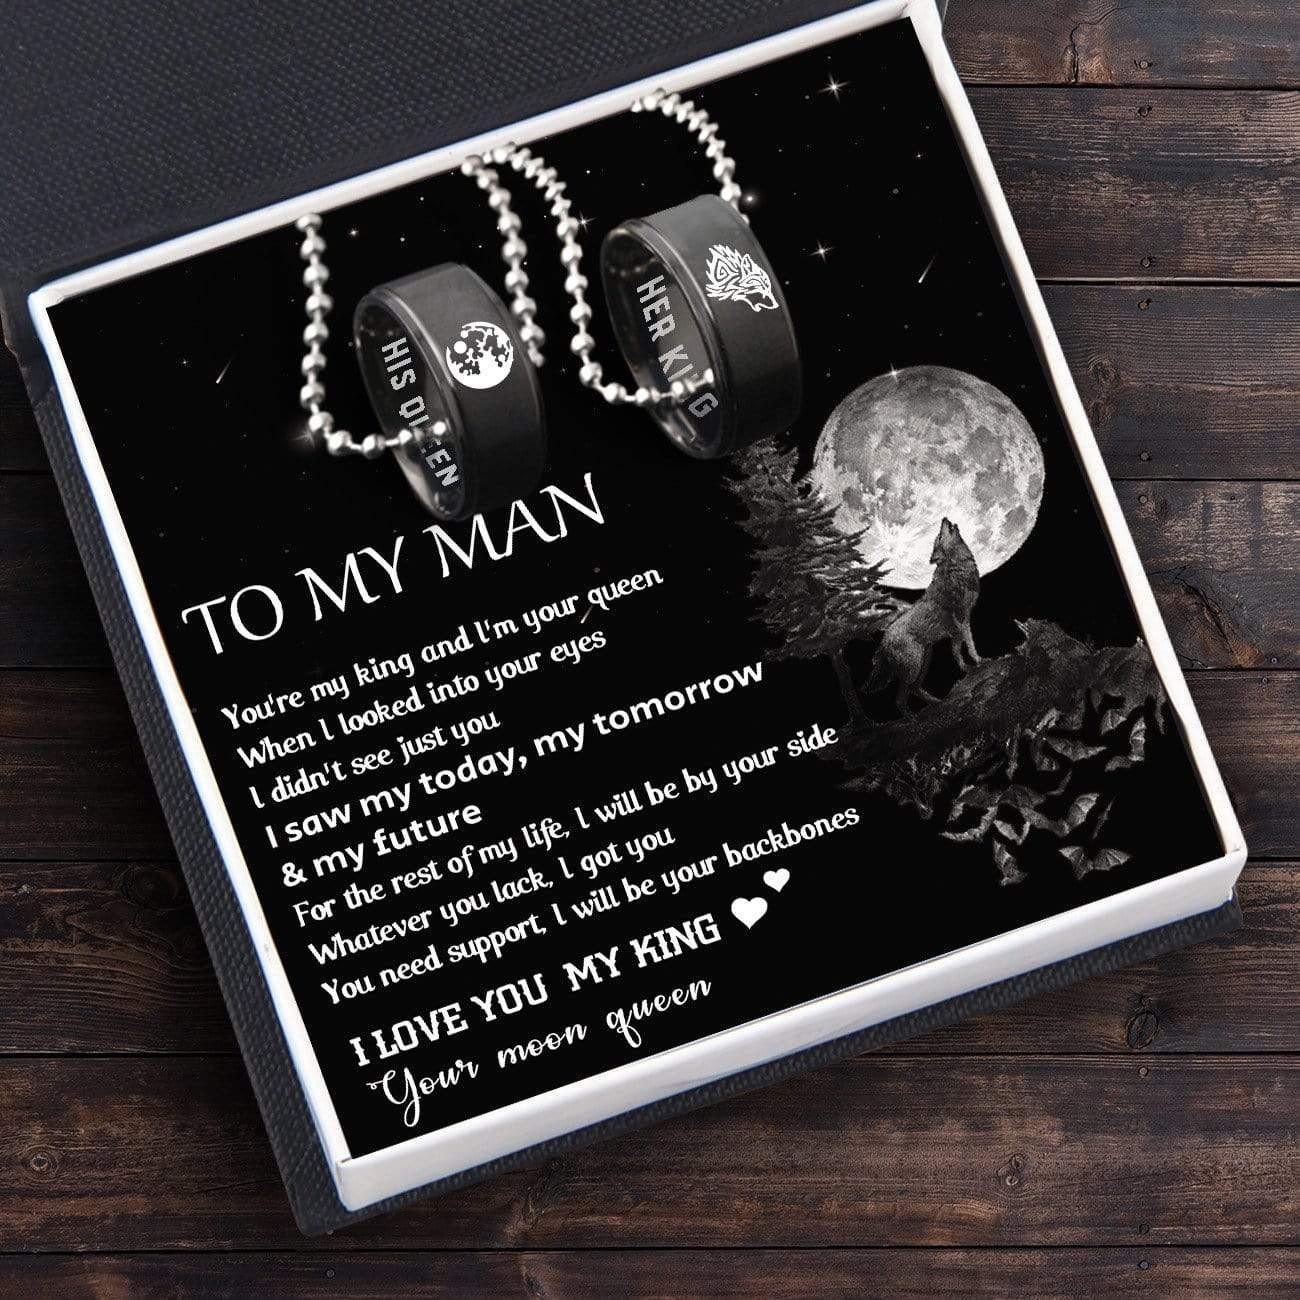 Couple Pendant Necklaces - To My Man - I Will Be By Your Side - Augnw26002